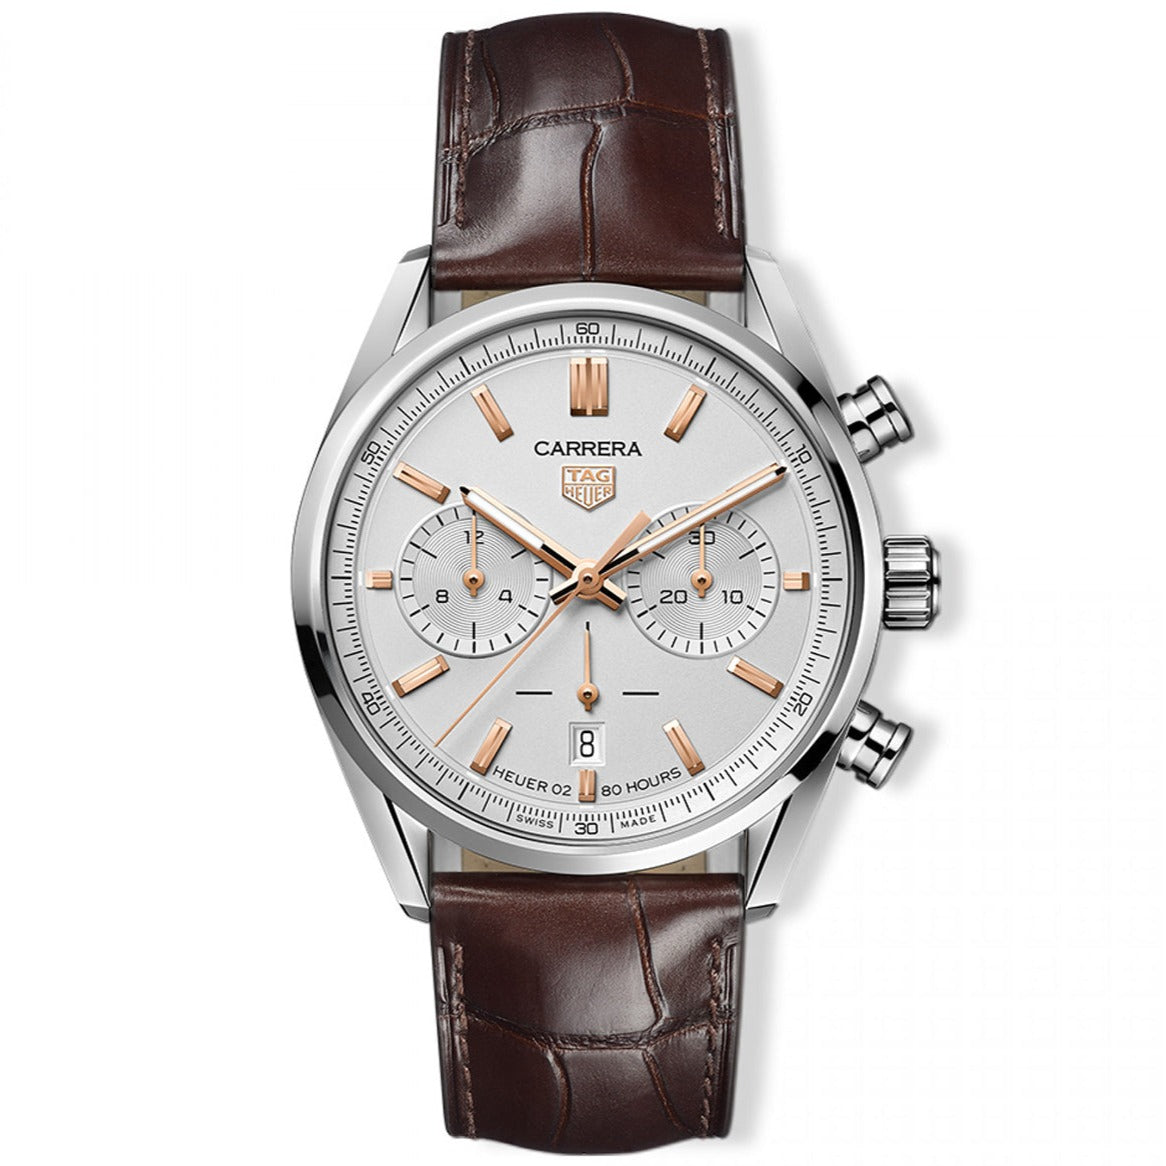 TAG Heuer Men's Carrera Automatic Chronograph Watch